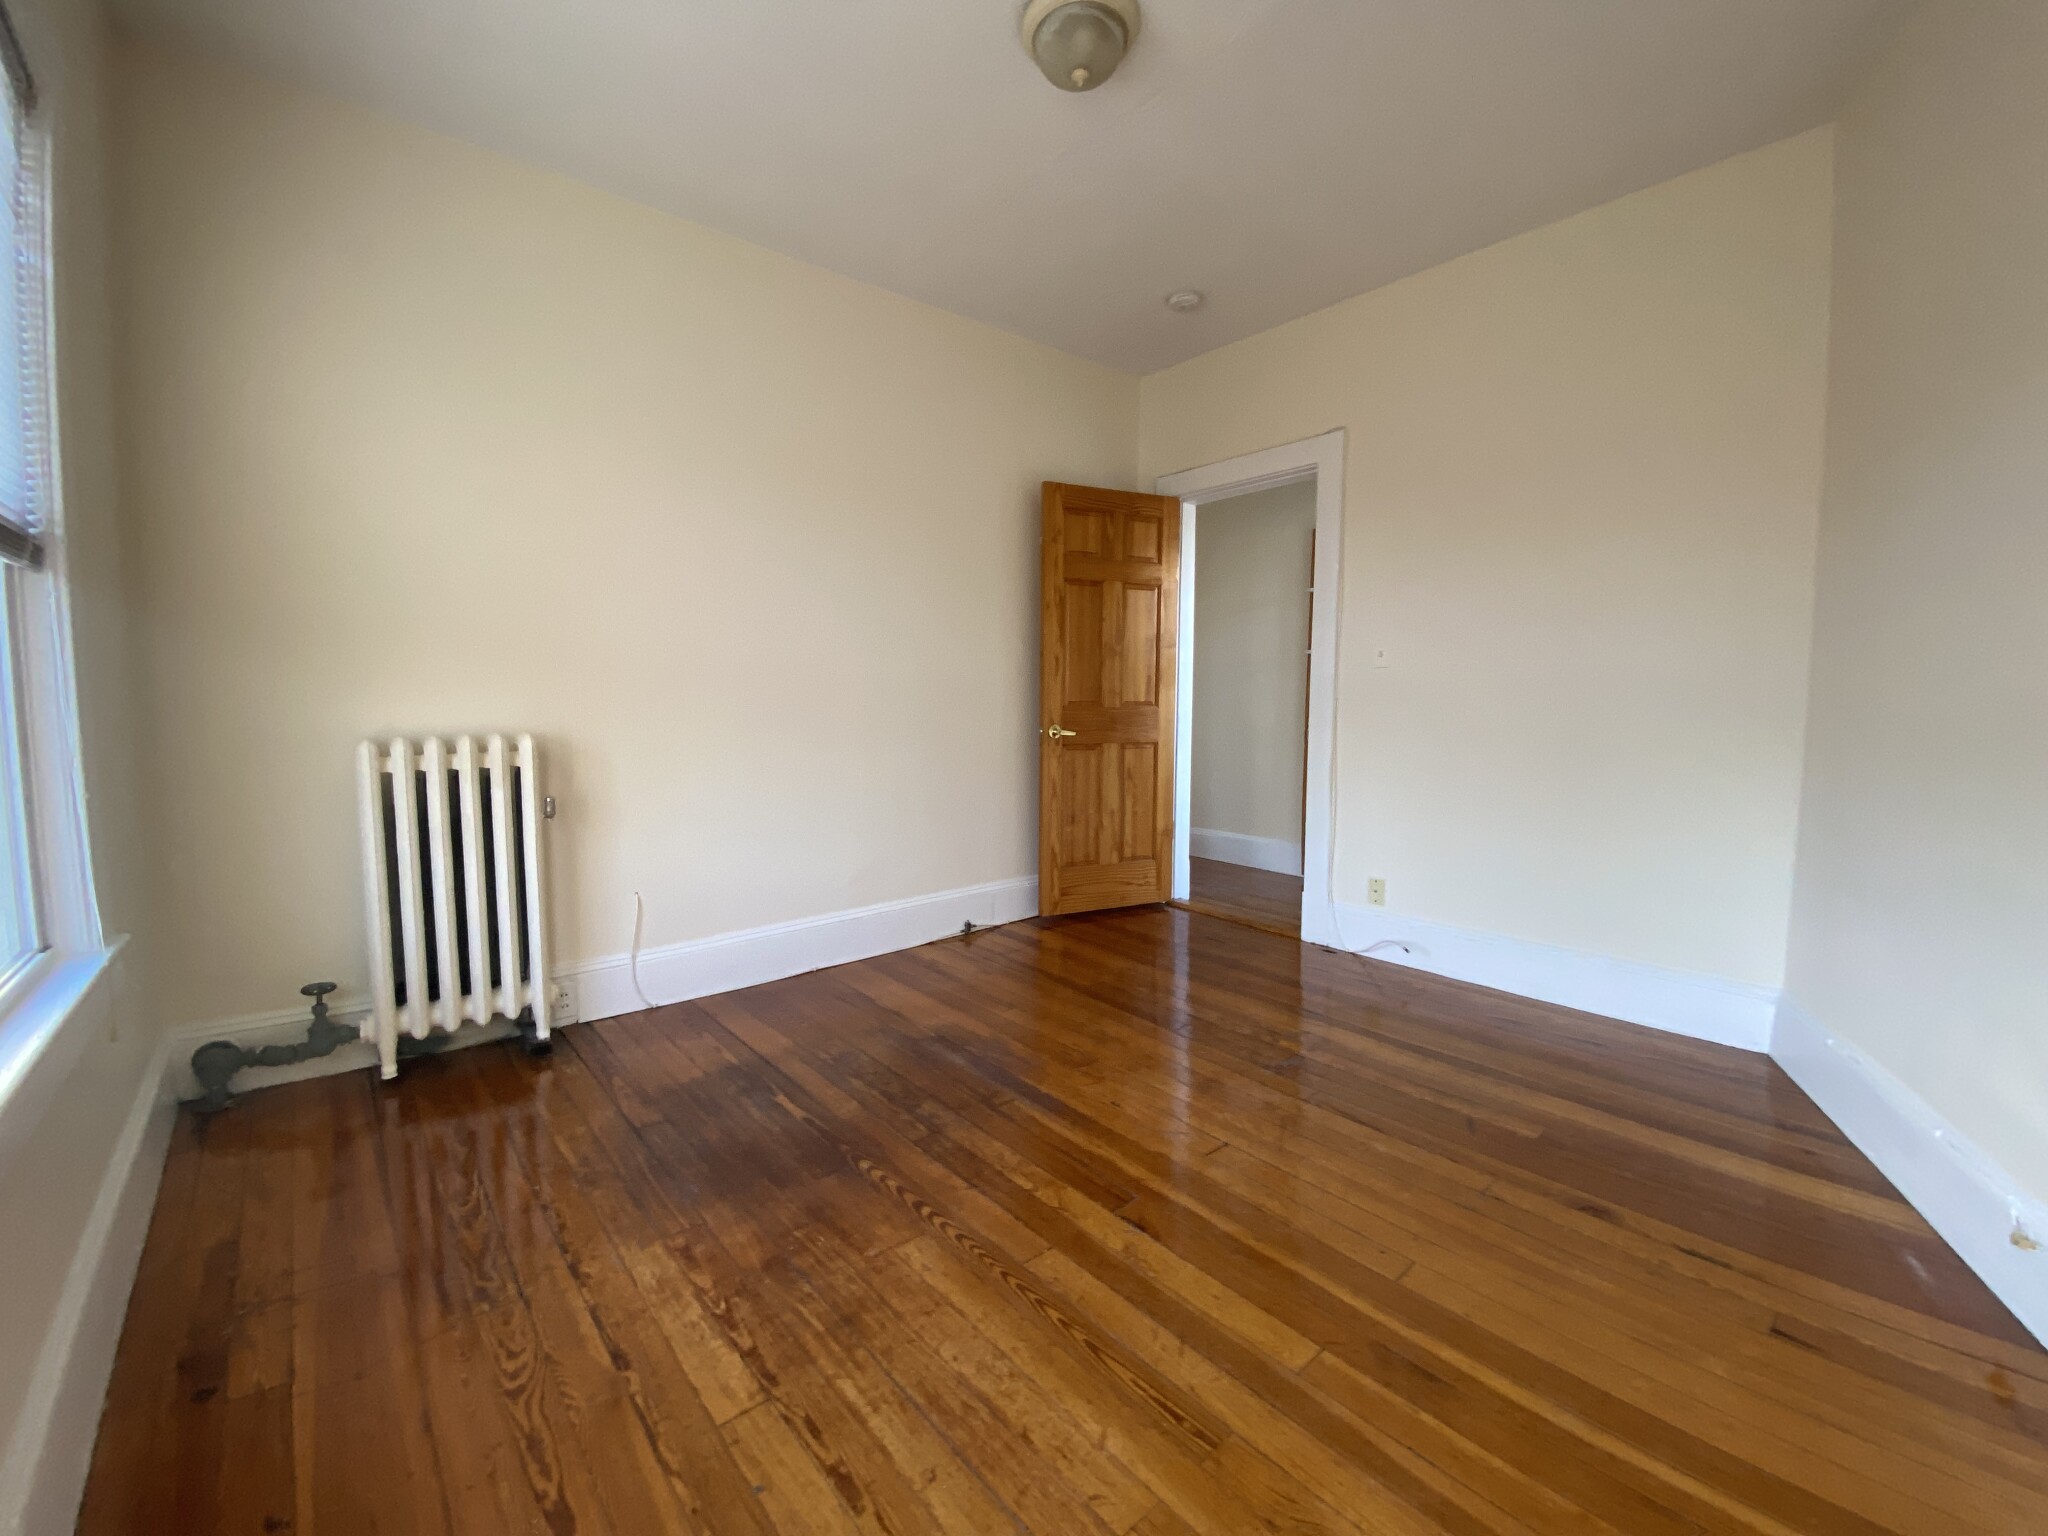 Photos of apartment on Forest,Cambridge MA 02140